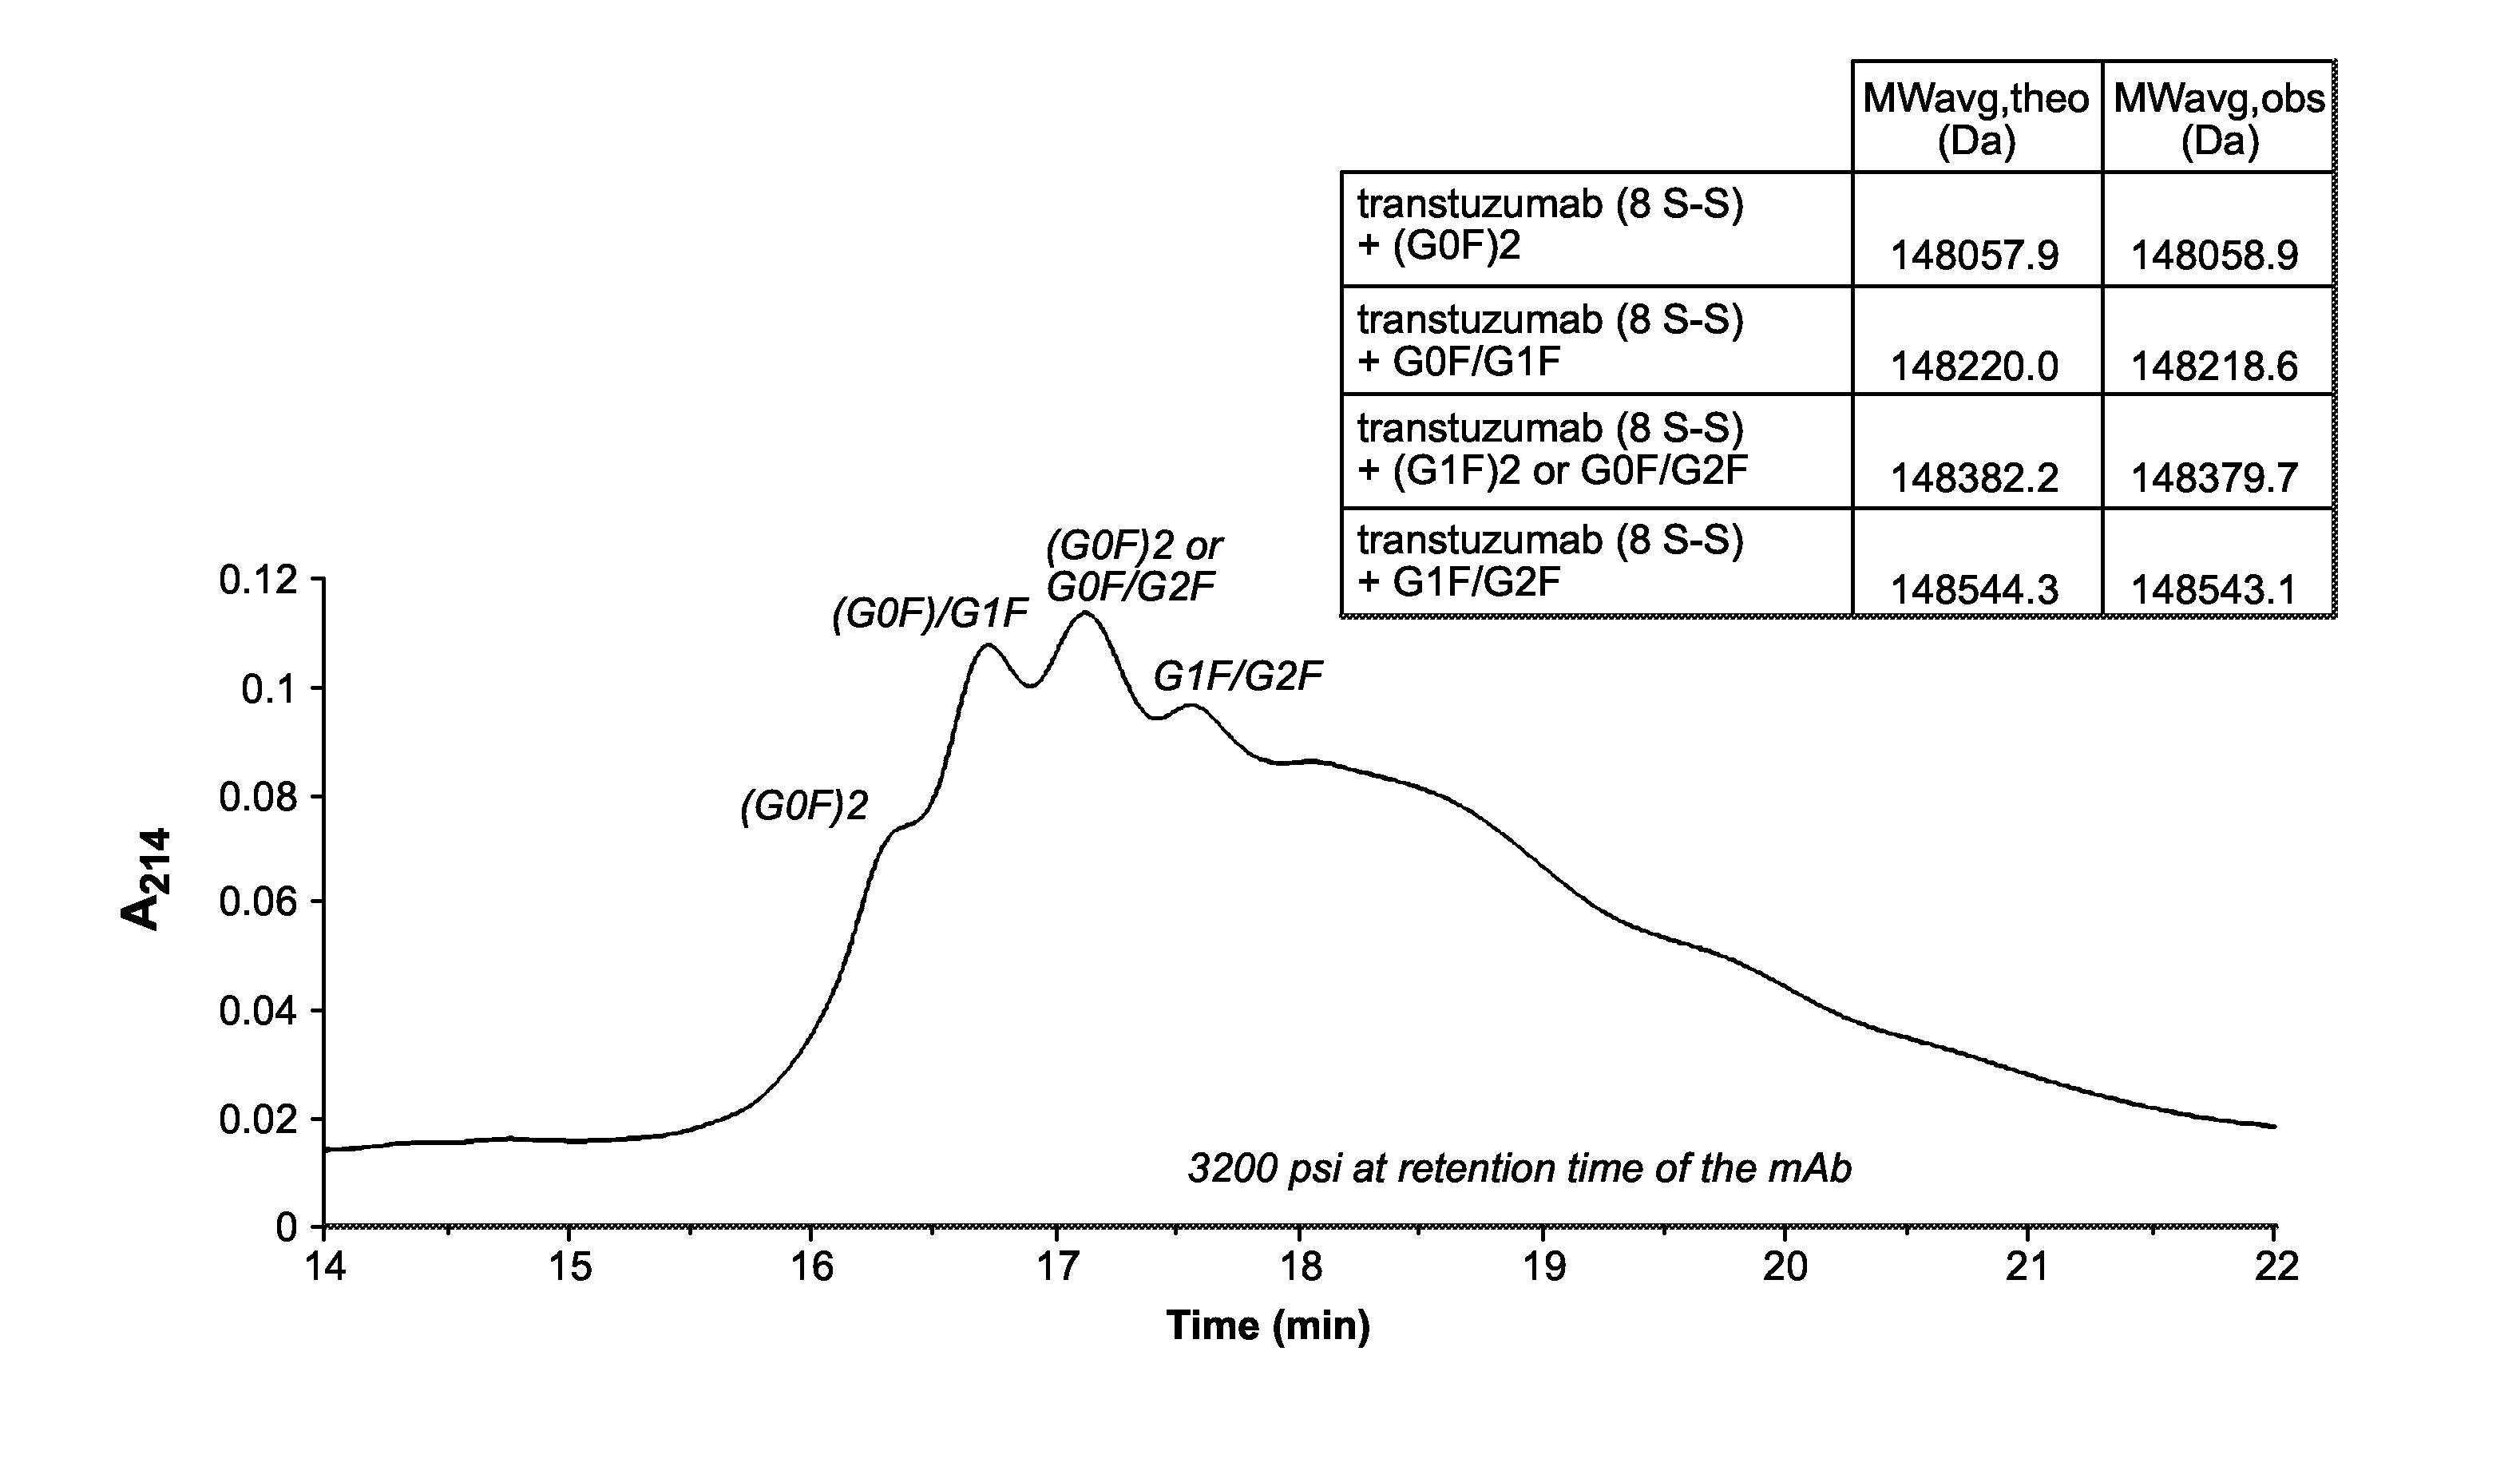 Materials for hydrophilic interaction chromatography and processes for preparation and use thereof for analysis of glycoproteins and glycopeptides